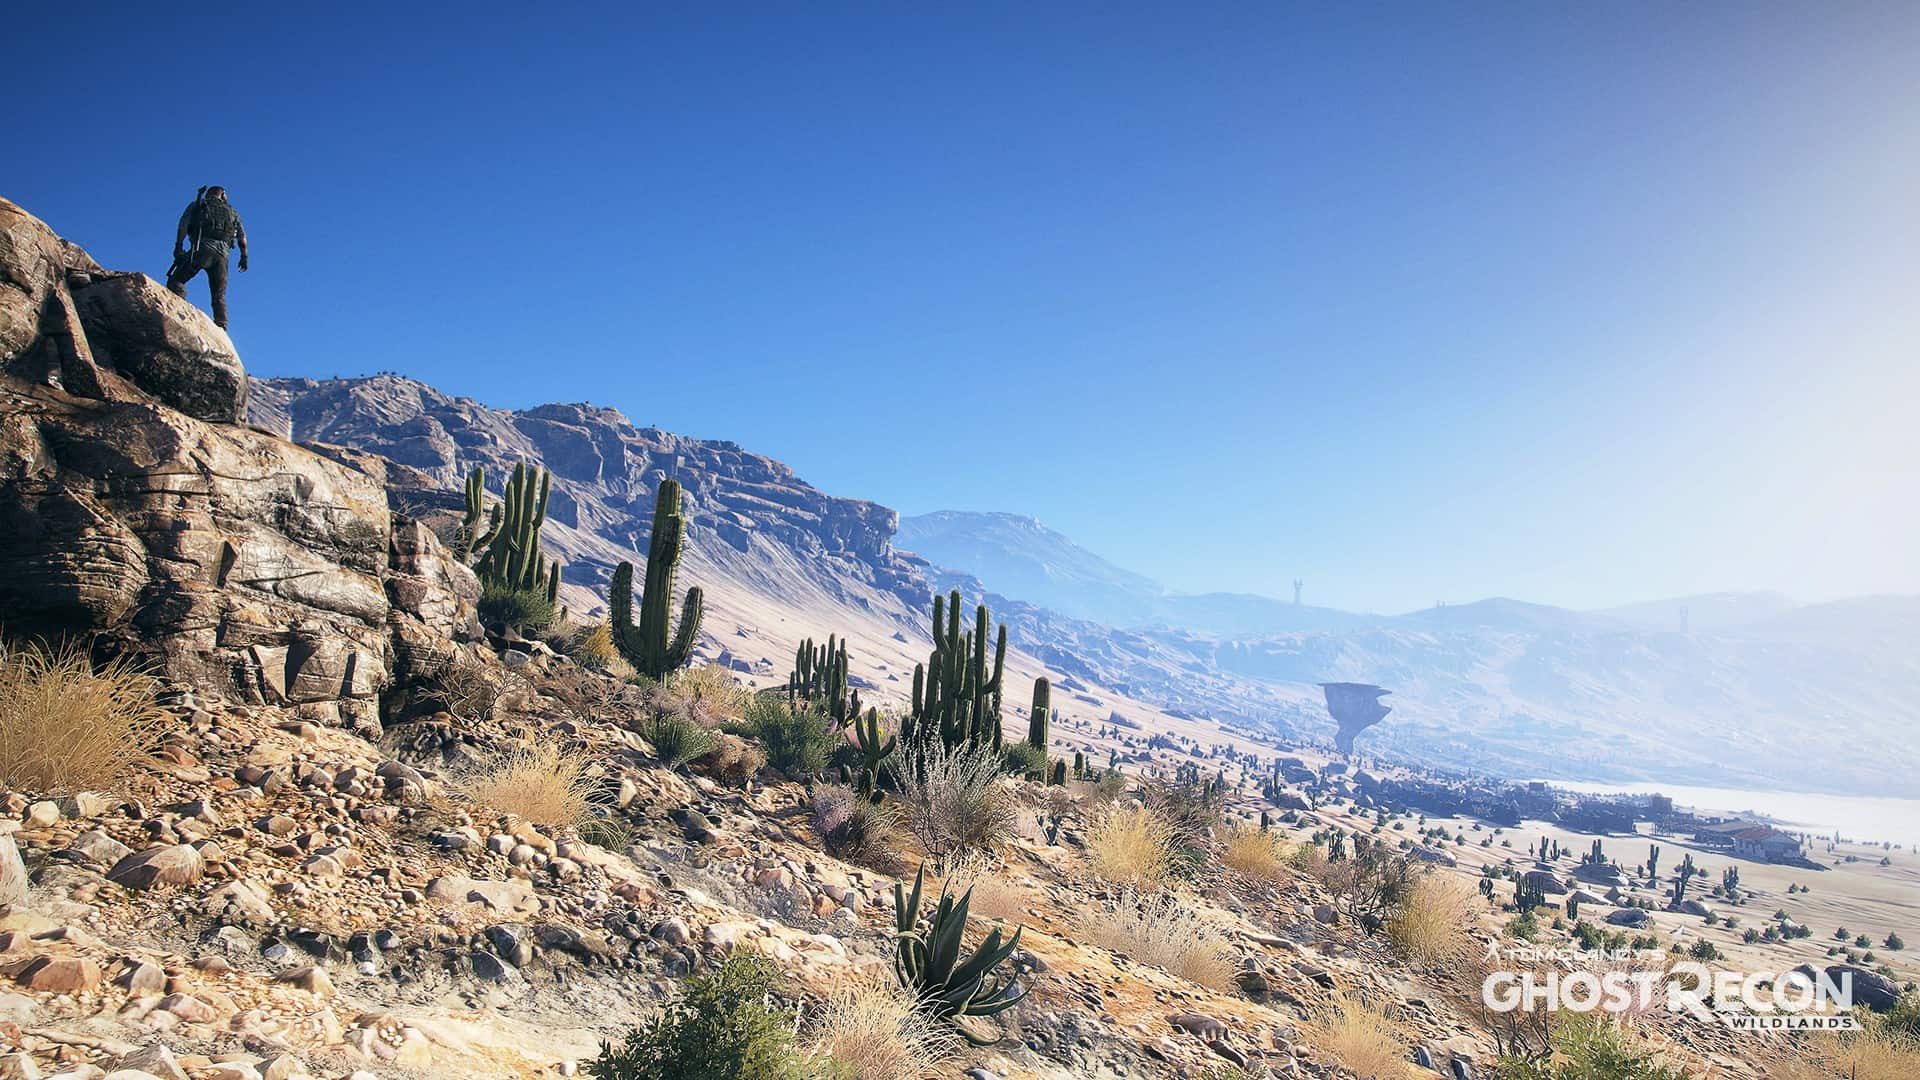 Ghost Recon Wildlands PC Tweaks Guide – Improve Graphics, Performance, Config File, FPS Increase